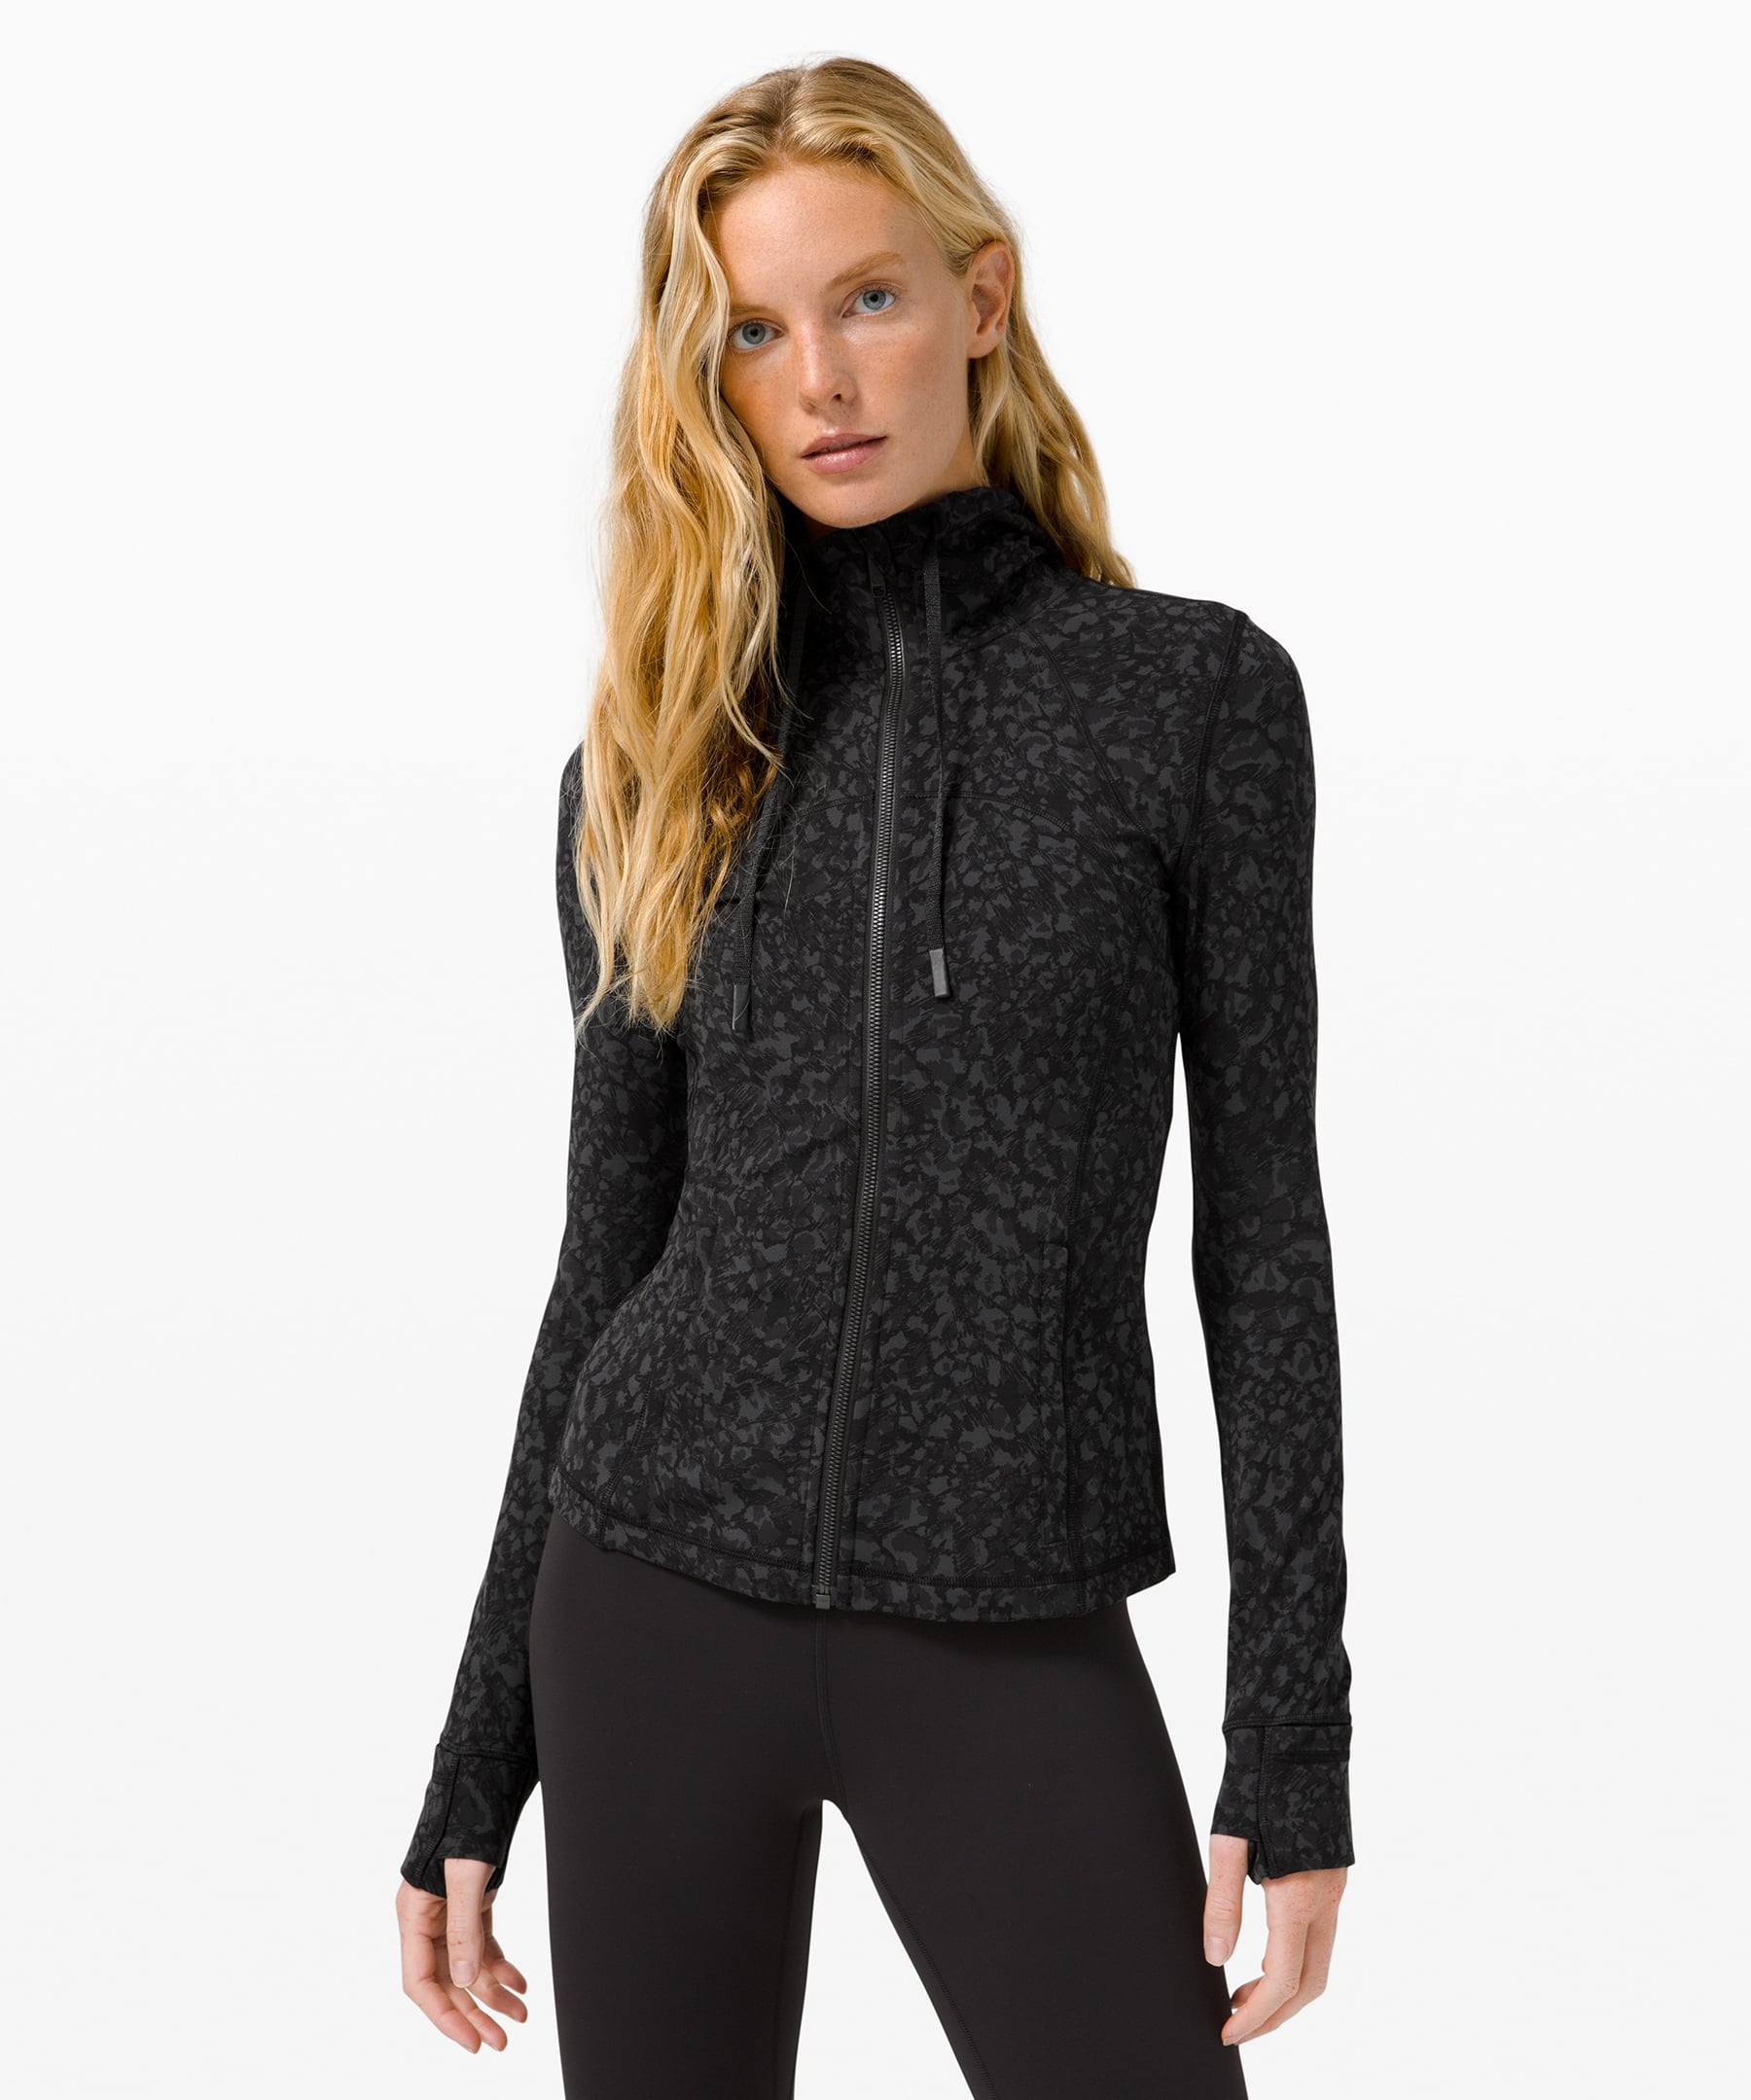 lululemon - Zipper garage keeps your chin safe and the 2 way zip allows for  range of movement.